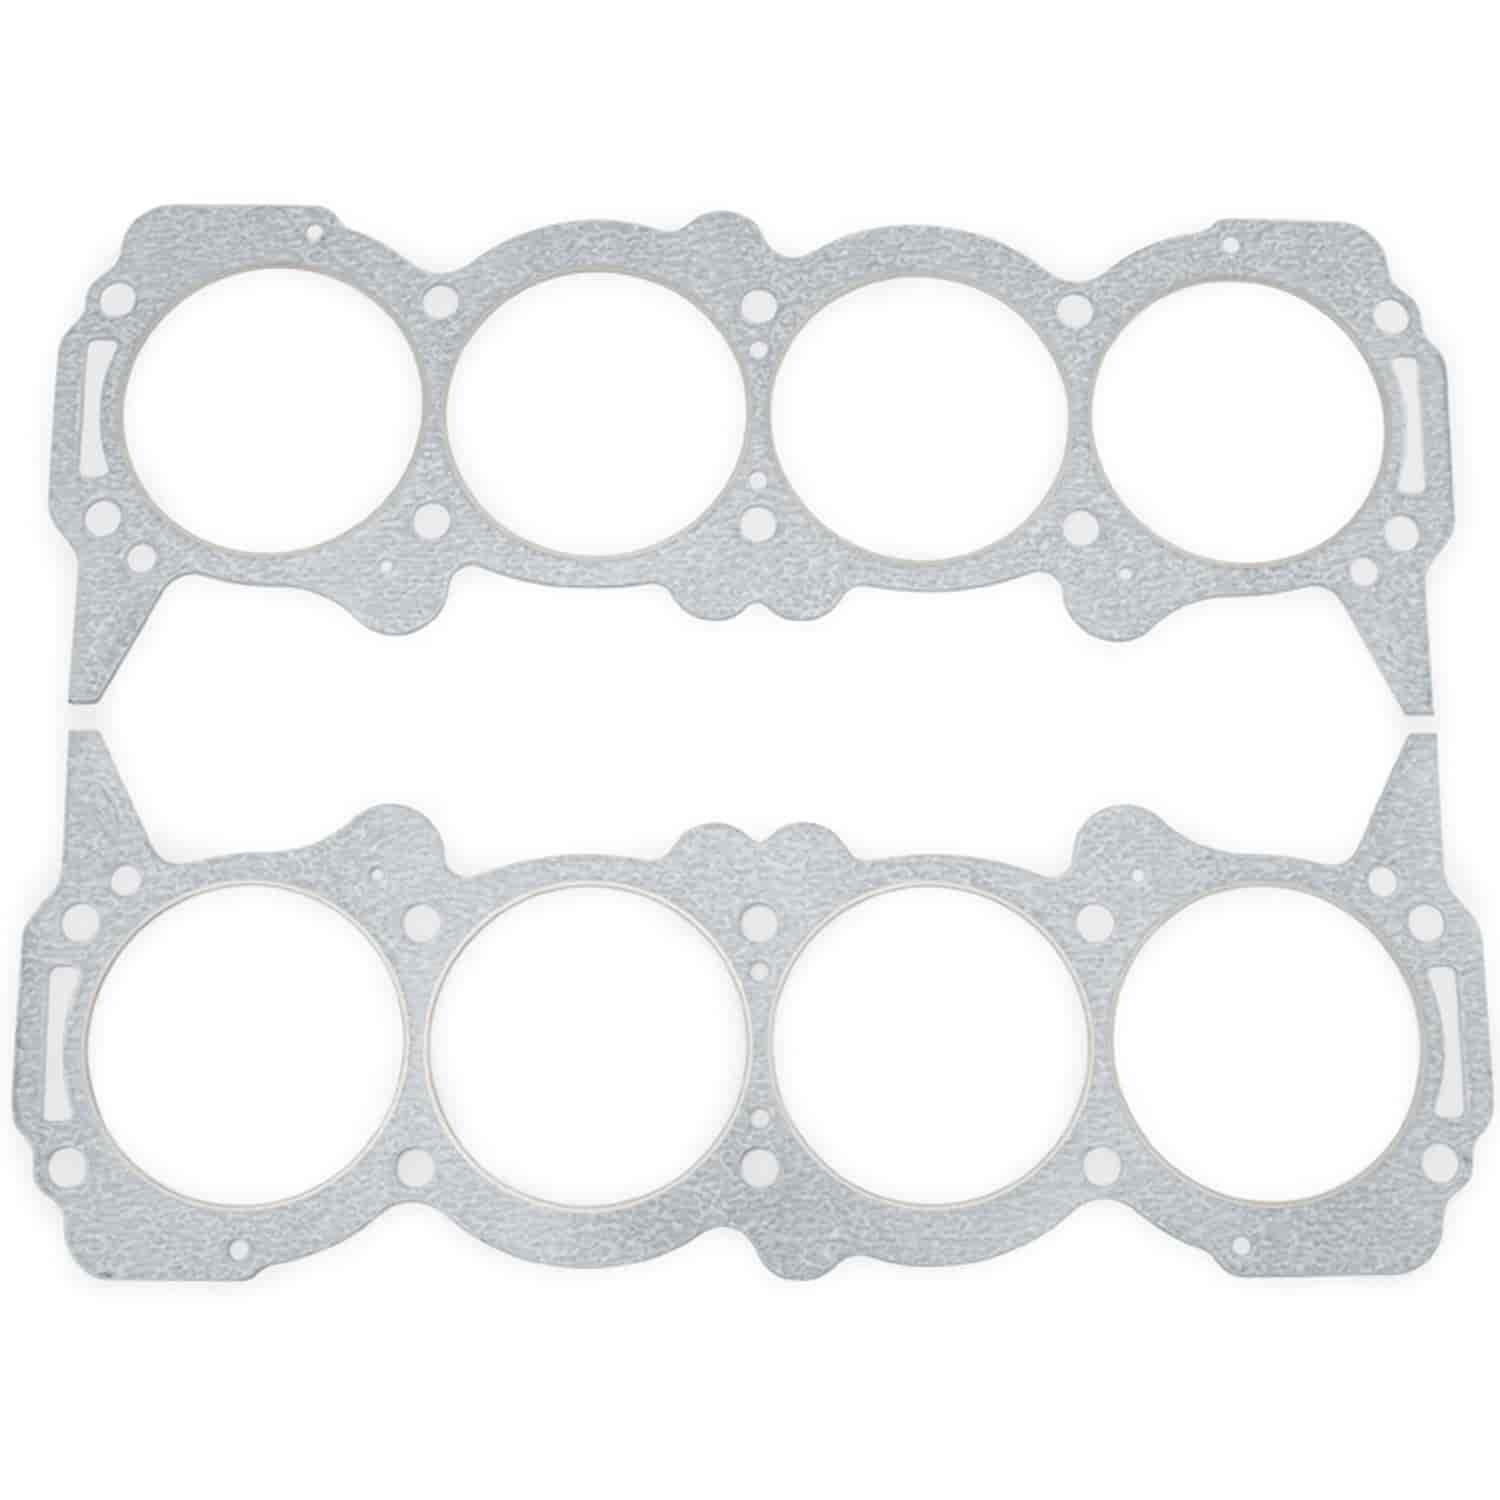 Head Gaskets for Buick 400-455 V8